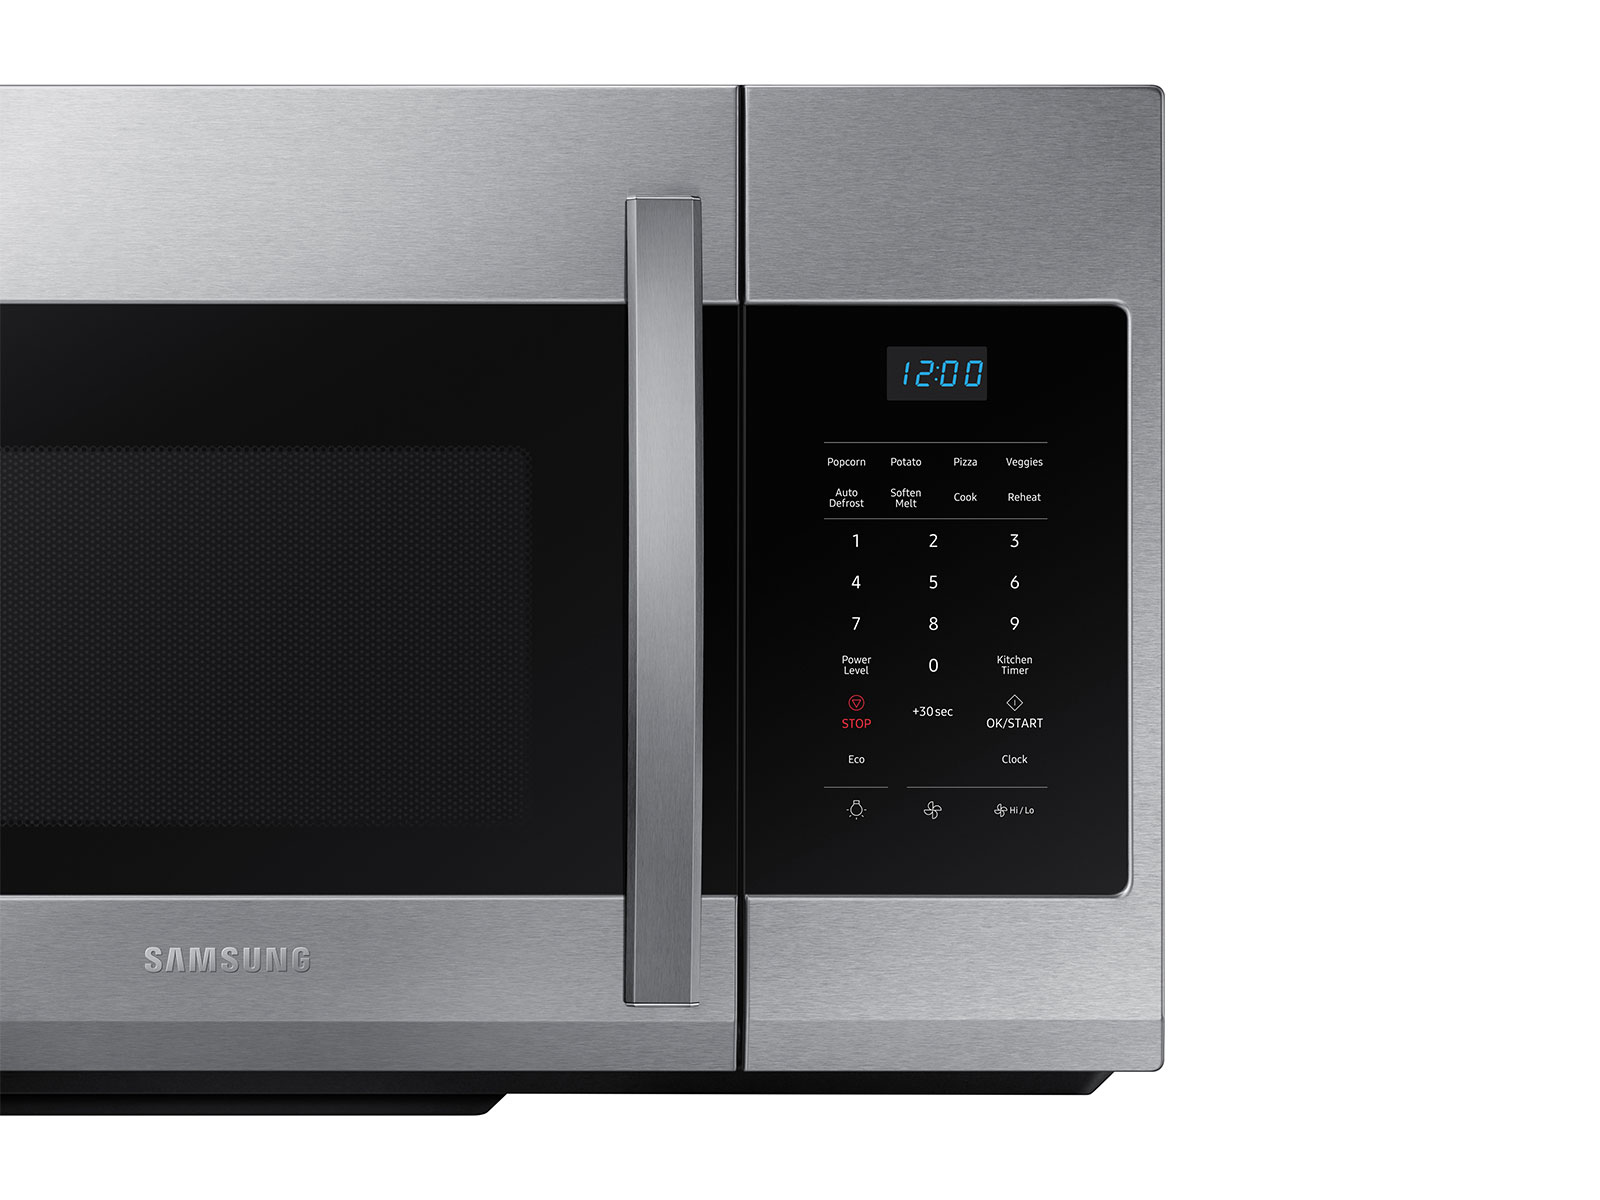 https://image-us.samsung.com/SamsungUS/home/home-appliances/microwaves/over-the-range/pdp/-me17r7021e/silver/PDP-GALLERY-R7021-010-Silver-1600x1200.jpg?$product-details-jpg$